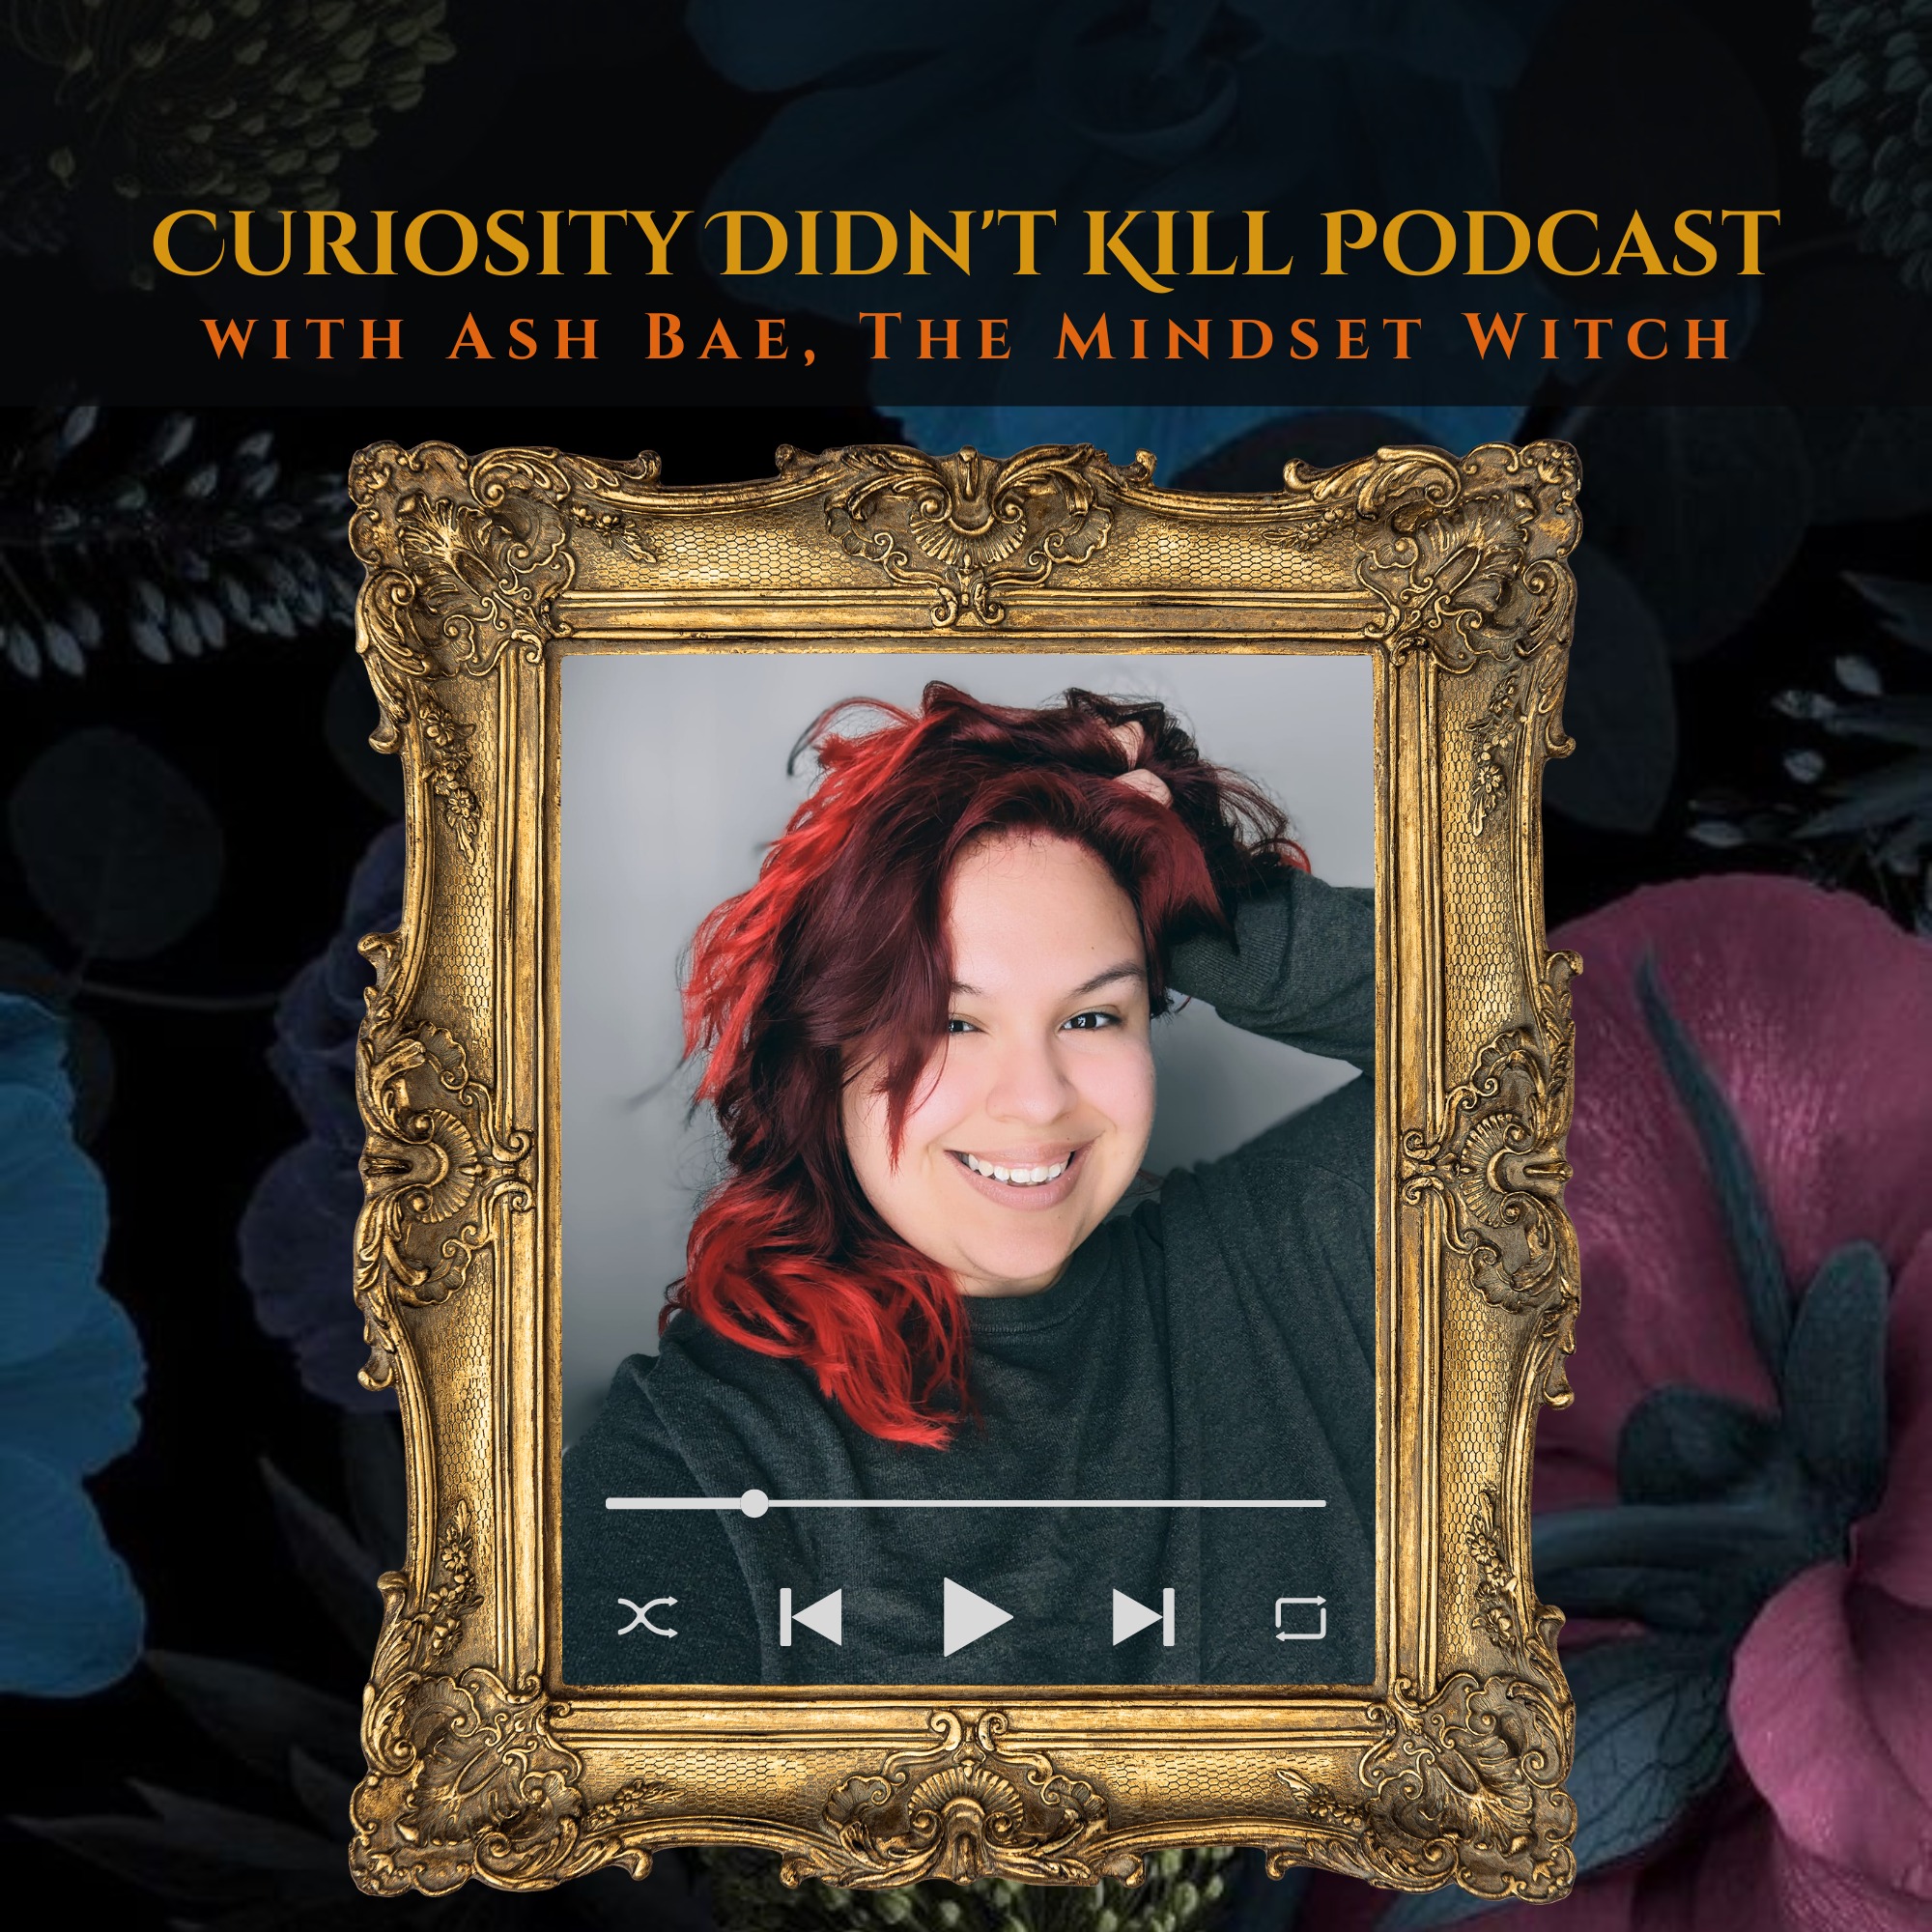 Curiosity Didn't Kill with Ash Bae, The Mindset Witch